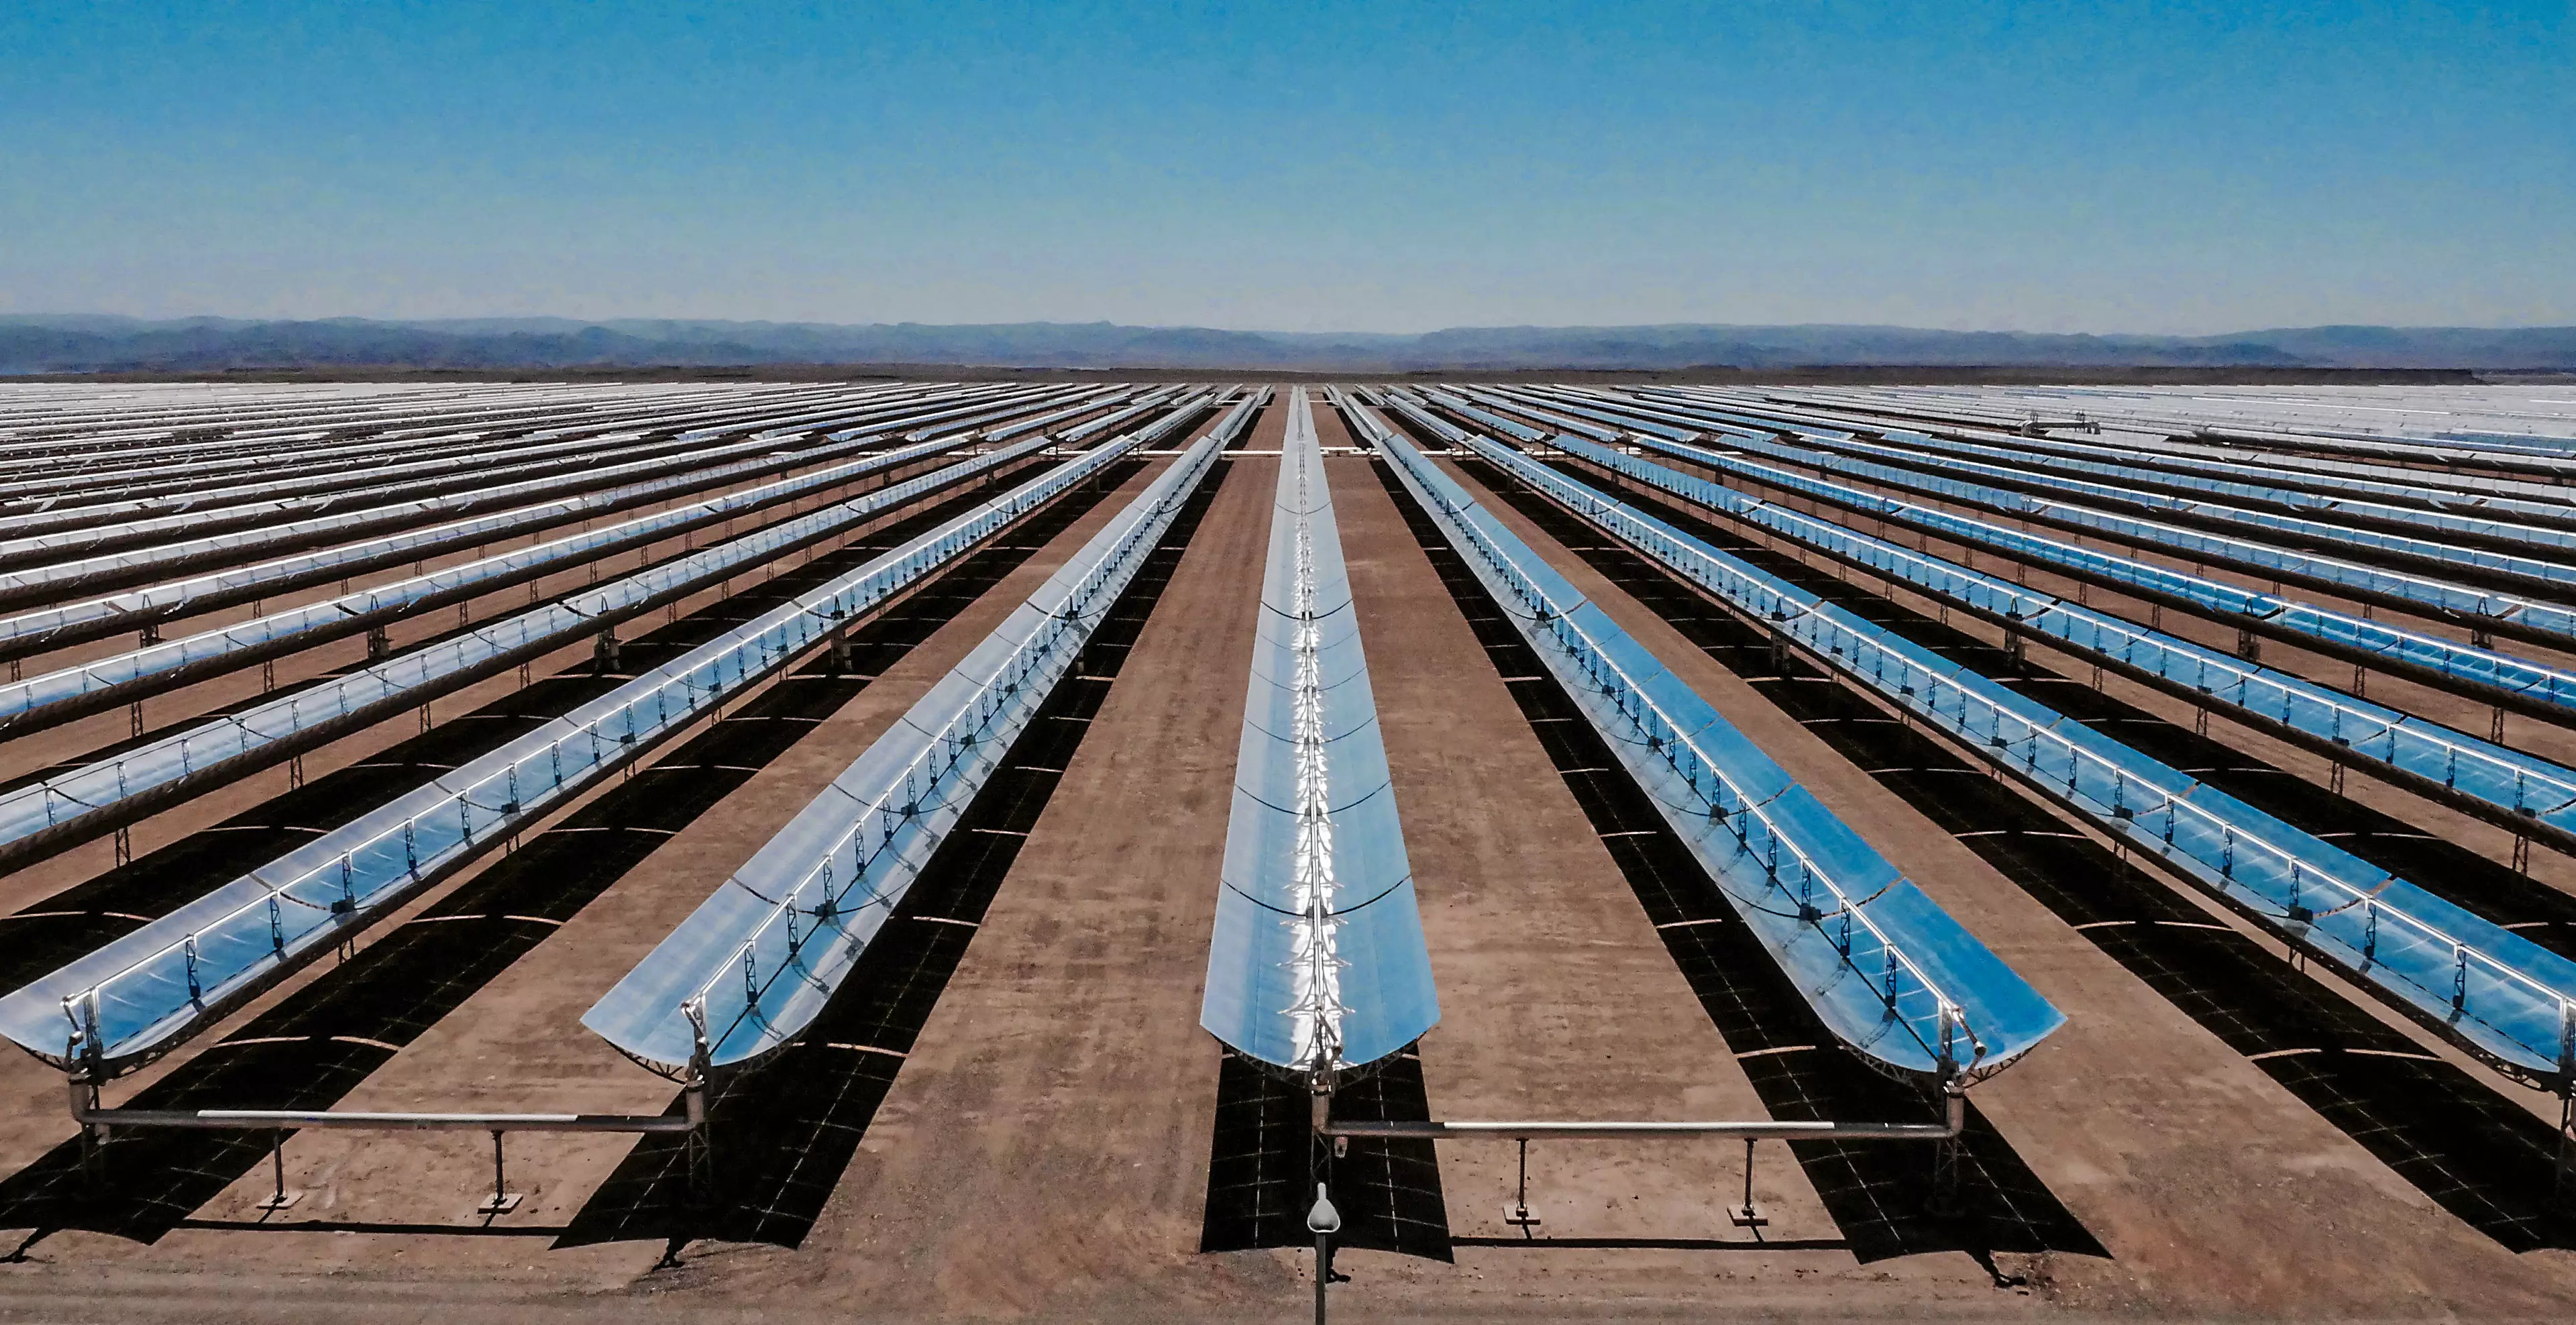 The world's largest solar power complex is currently in Ouarzazate, Morocco (